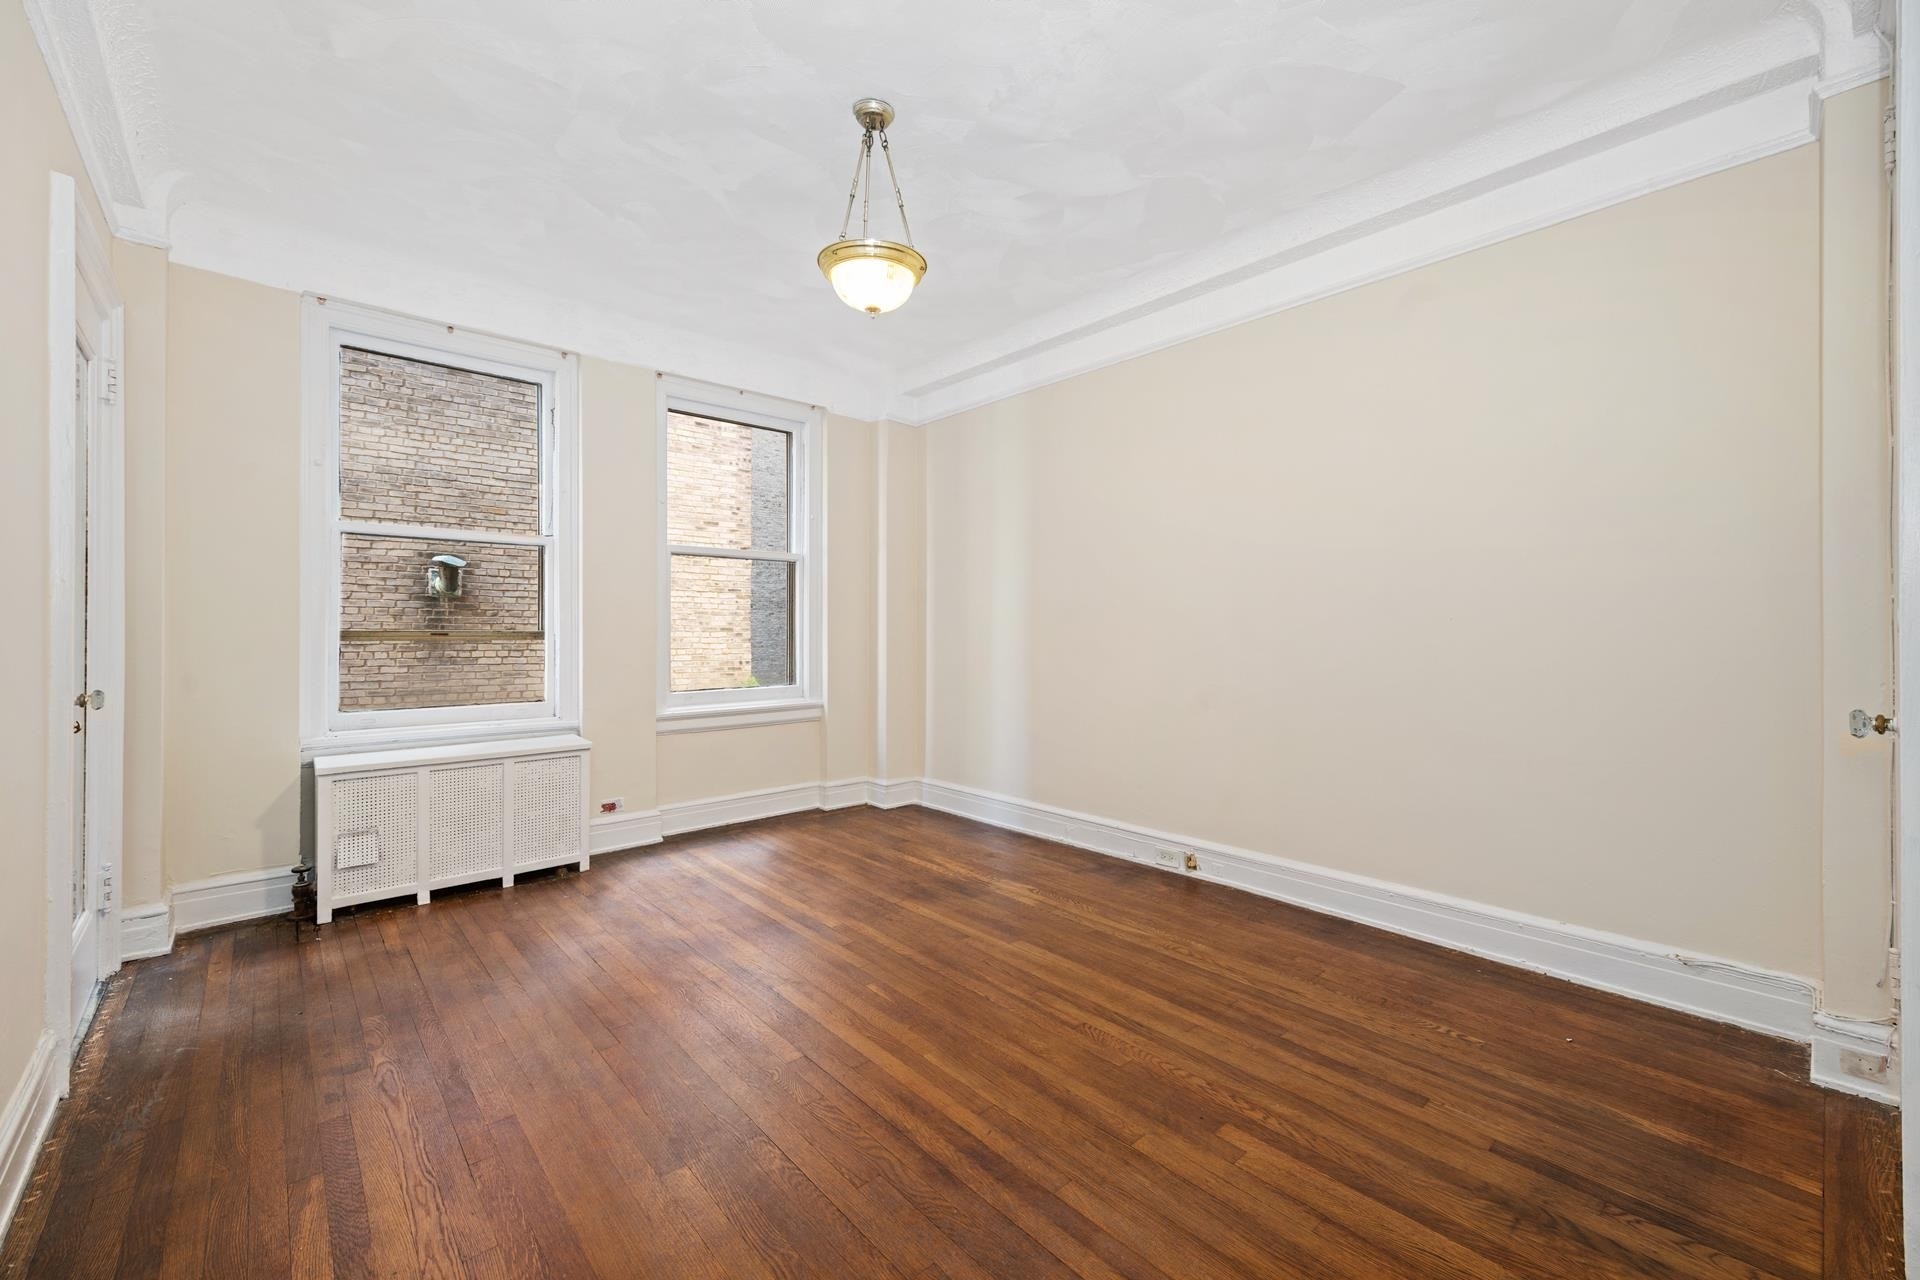 8. Co-op Properties for Sale at East 82 Corporation, 108 E 82ND ST, 7C Upper East Side, New York, NY 10028